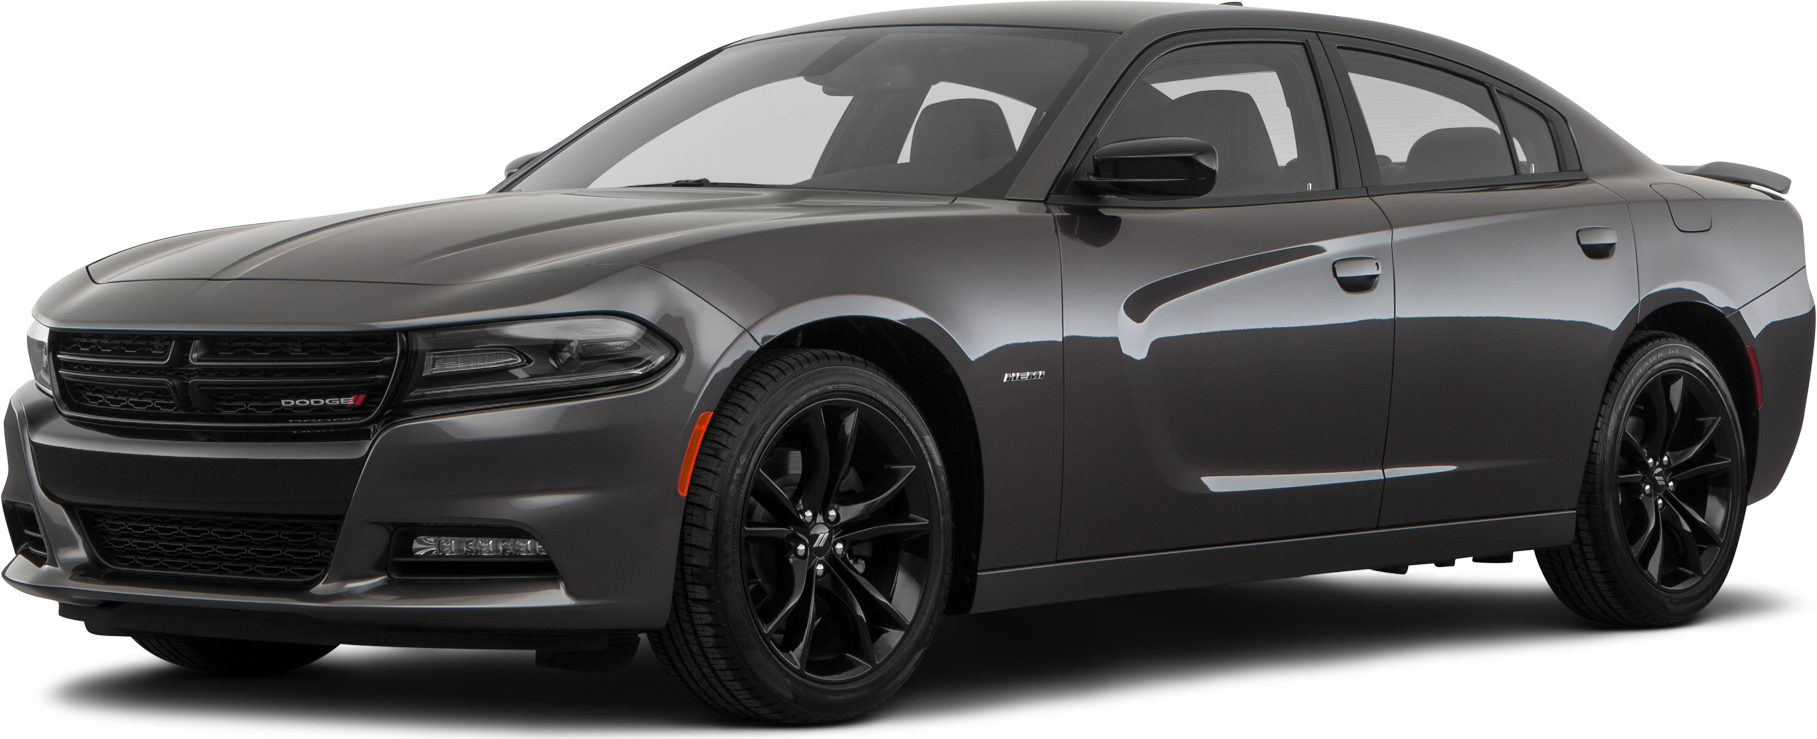 2019 Dodge Charger Values & Cars for Sale | Kelley Blue Book